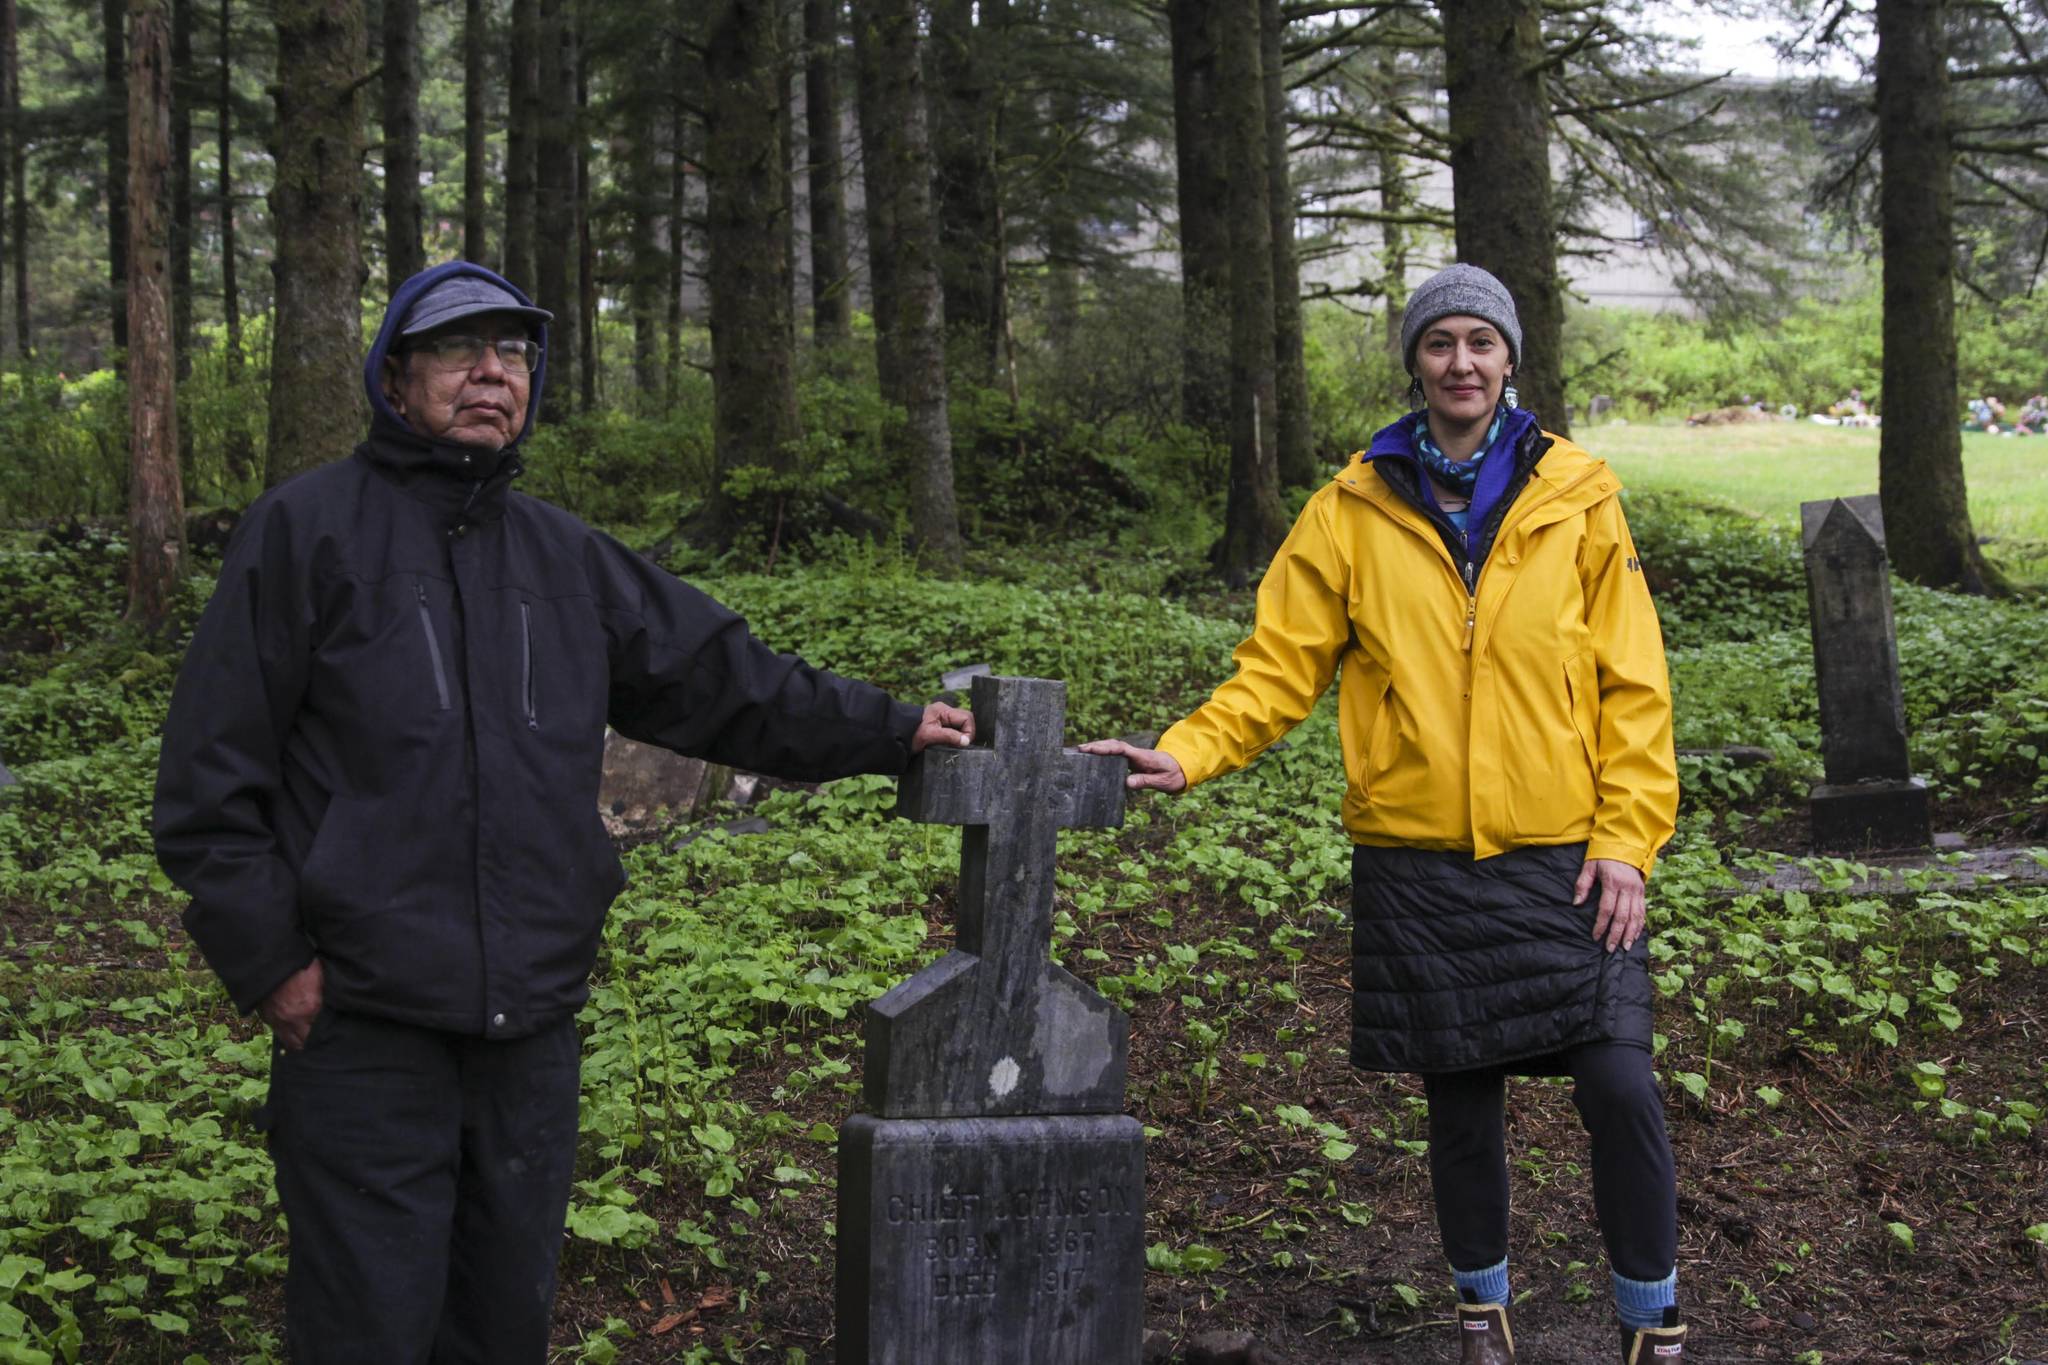 Bob Sam and Jamiann Hasselquist touch the headstone of Chief Joseph, a tribal leader buried in the Lawson Creek Cemetery in 1917, as they work with other volunteers to restore the cemetery, on May 22, 2021. (Michael S. Lockett / Juneau Empire)